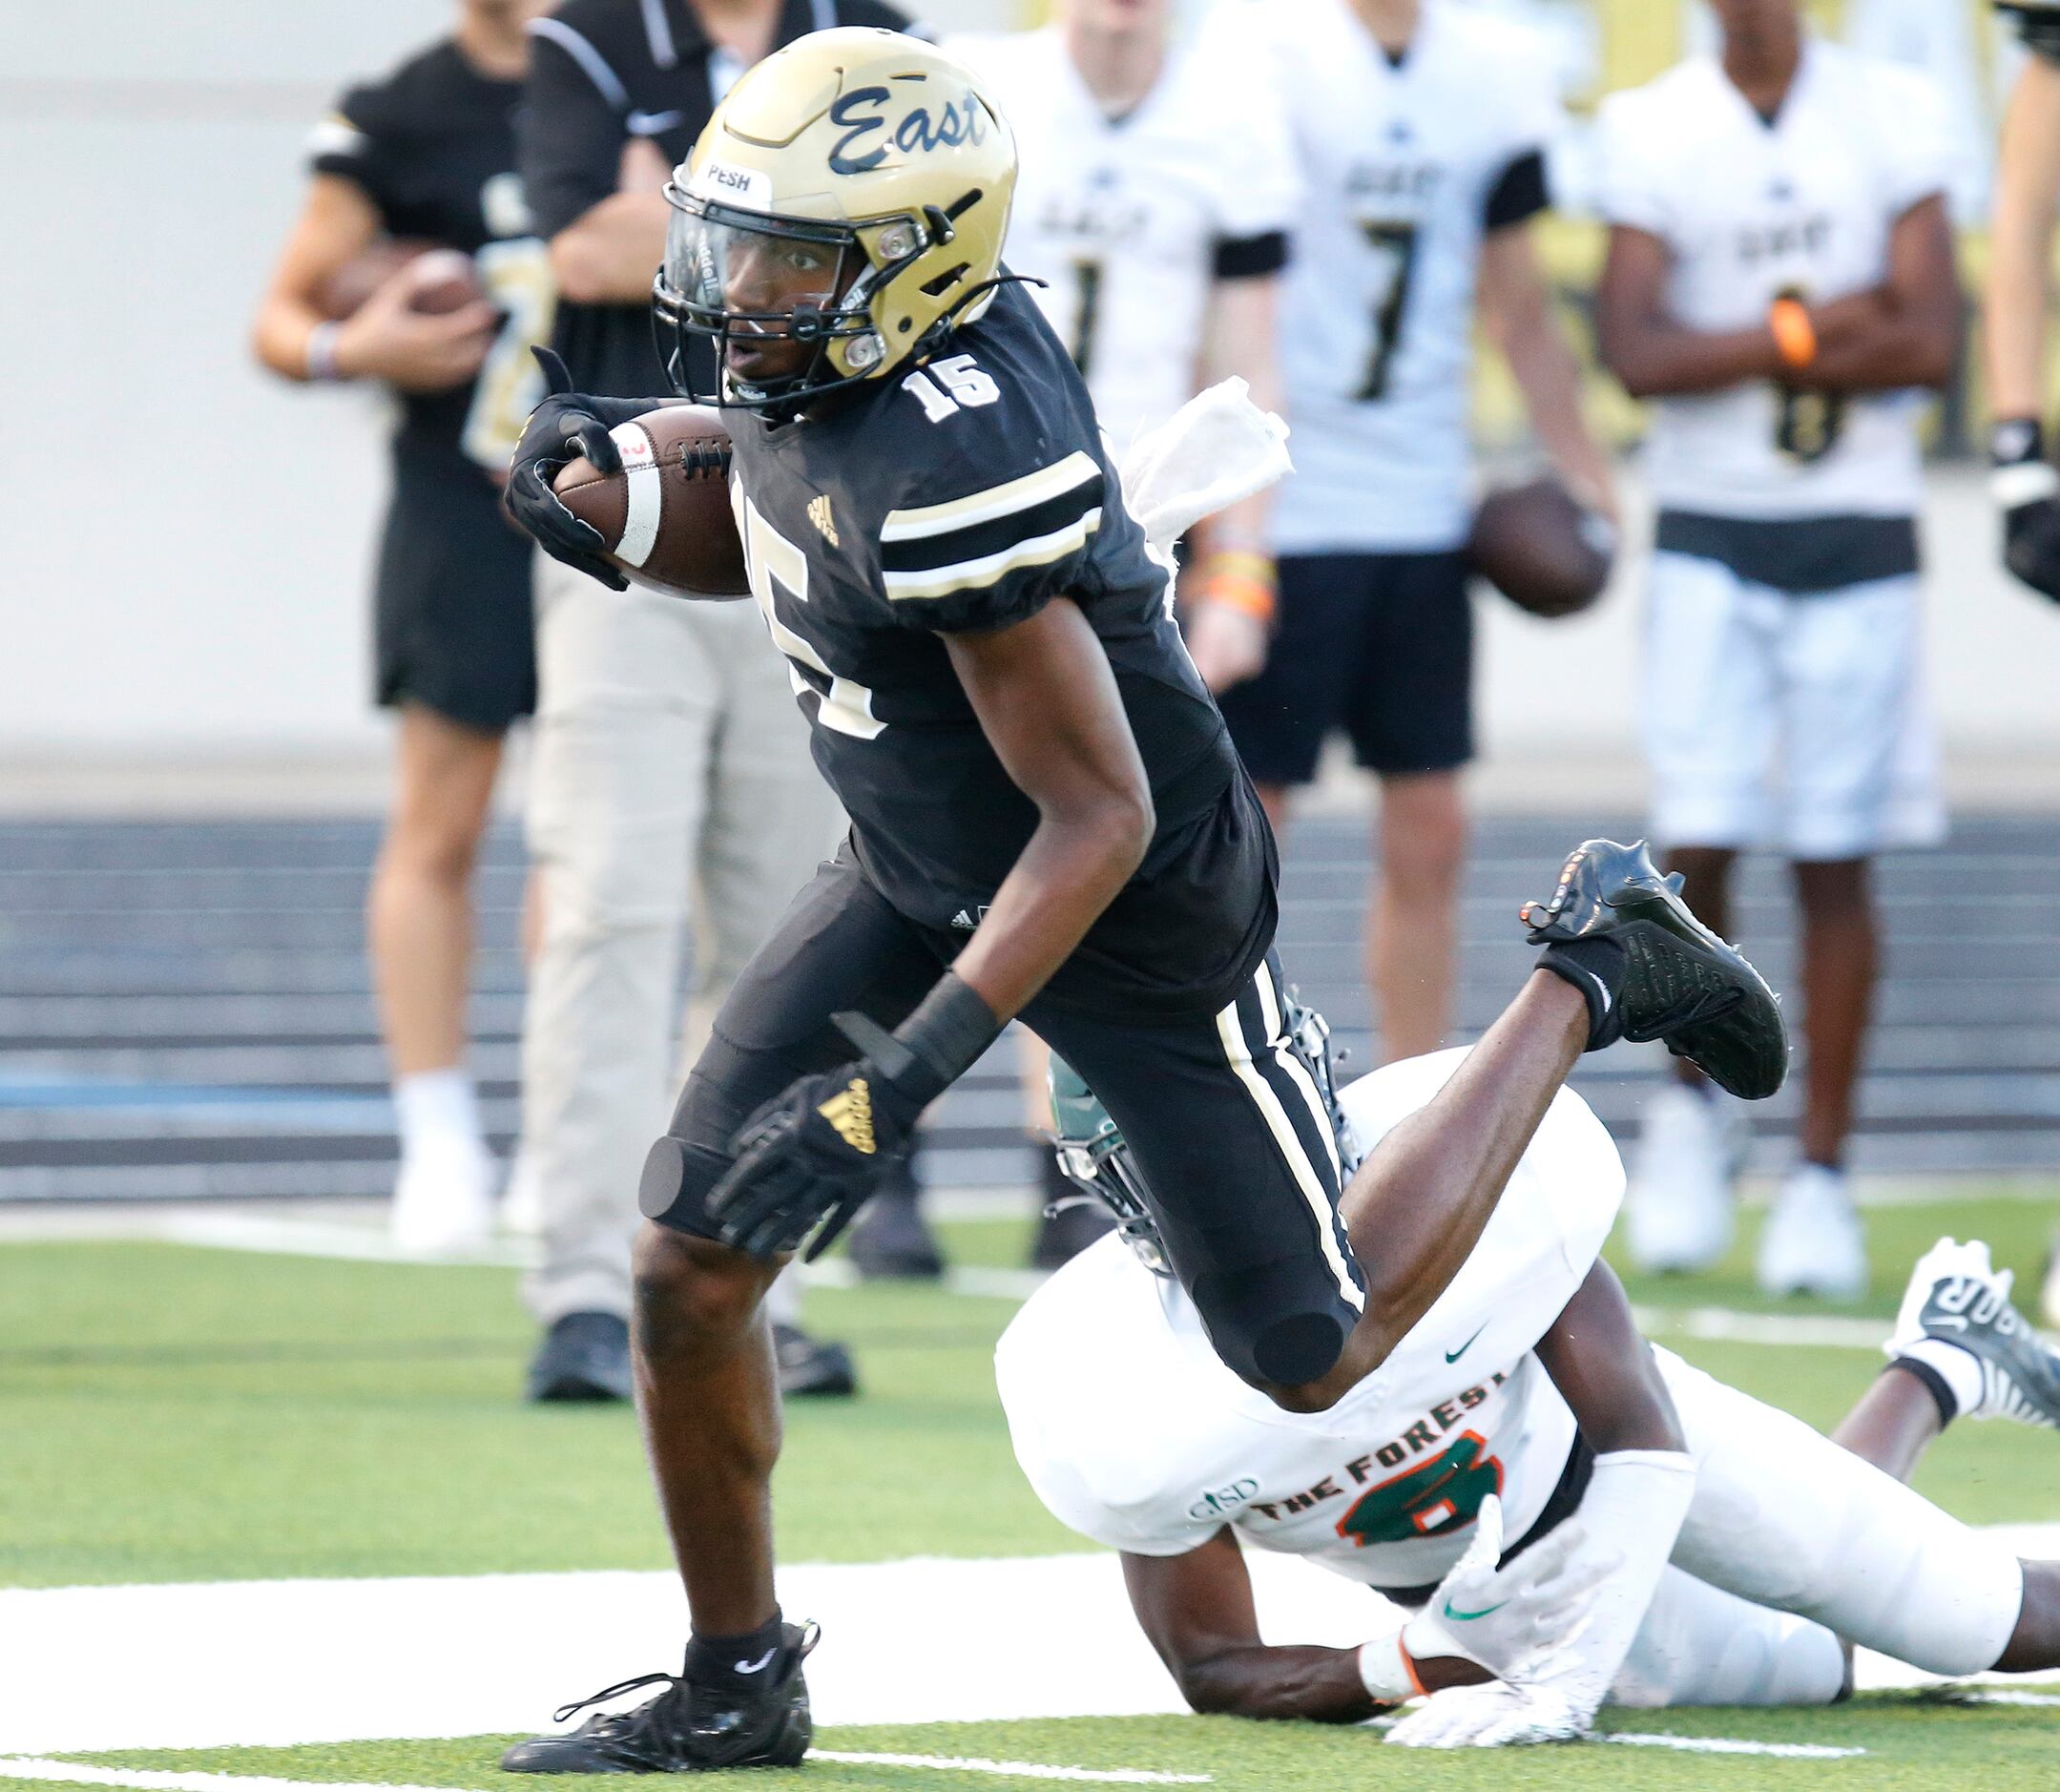 Plano East Senior High School wide receiver Elijah Prince (15) breaks the tackle attempt by...